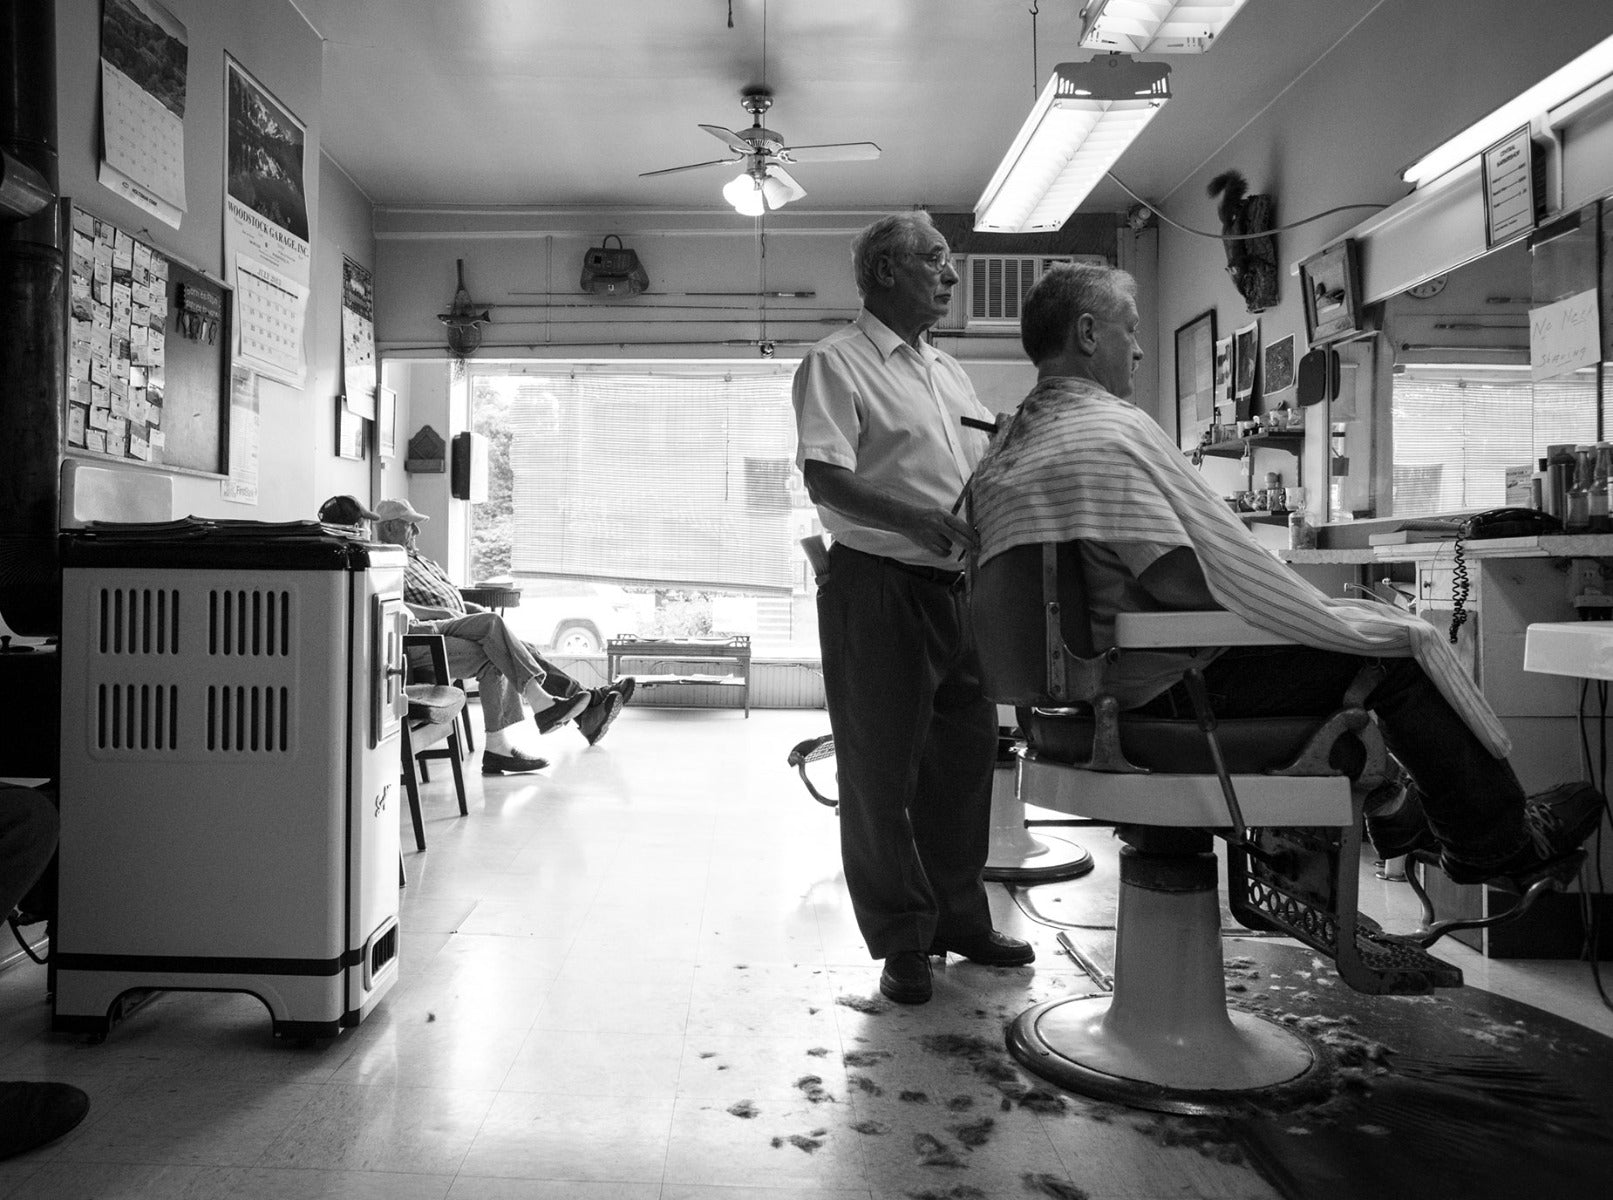 Man getting a haircut in a barbershop with barber